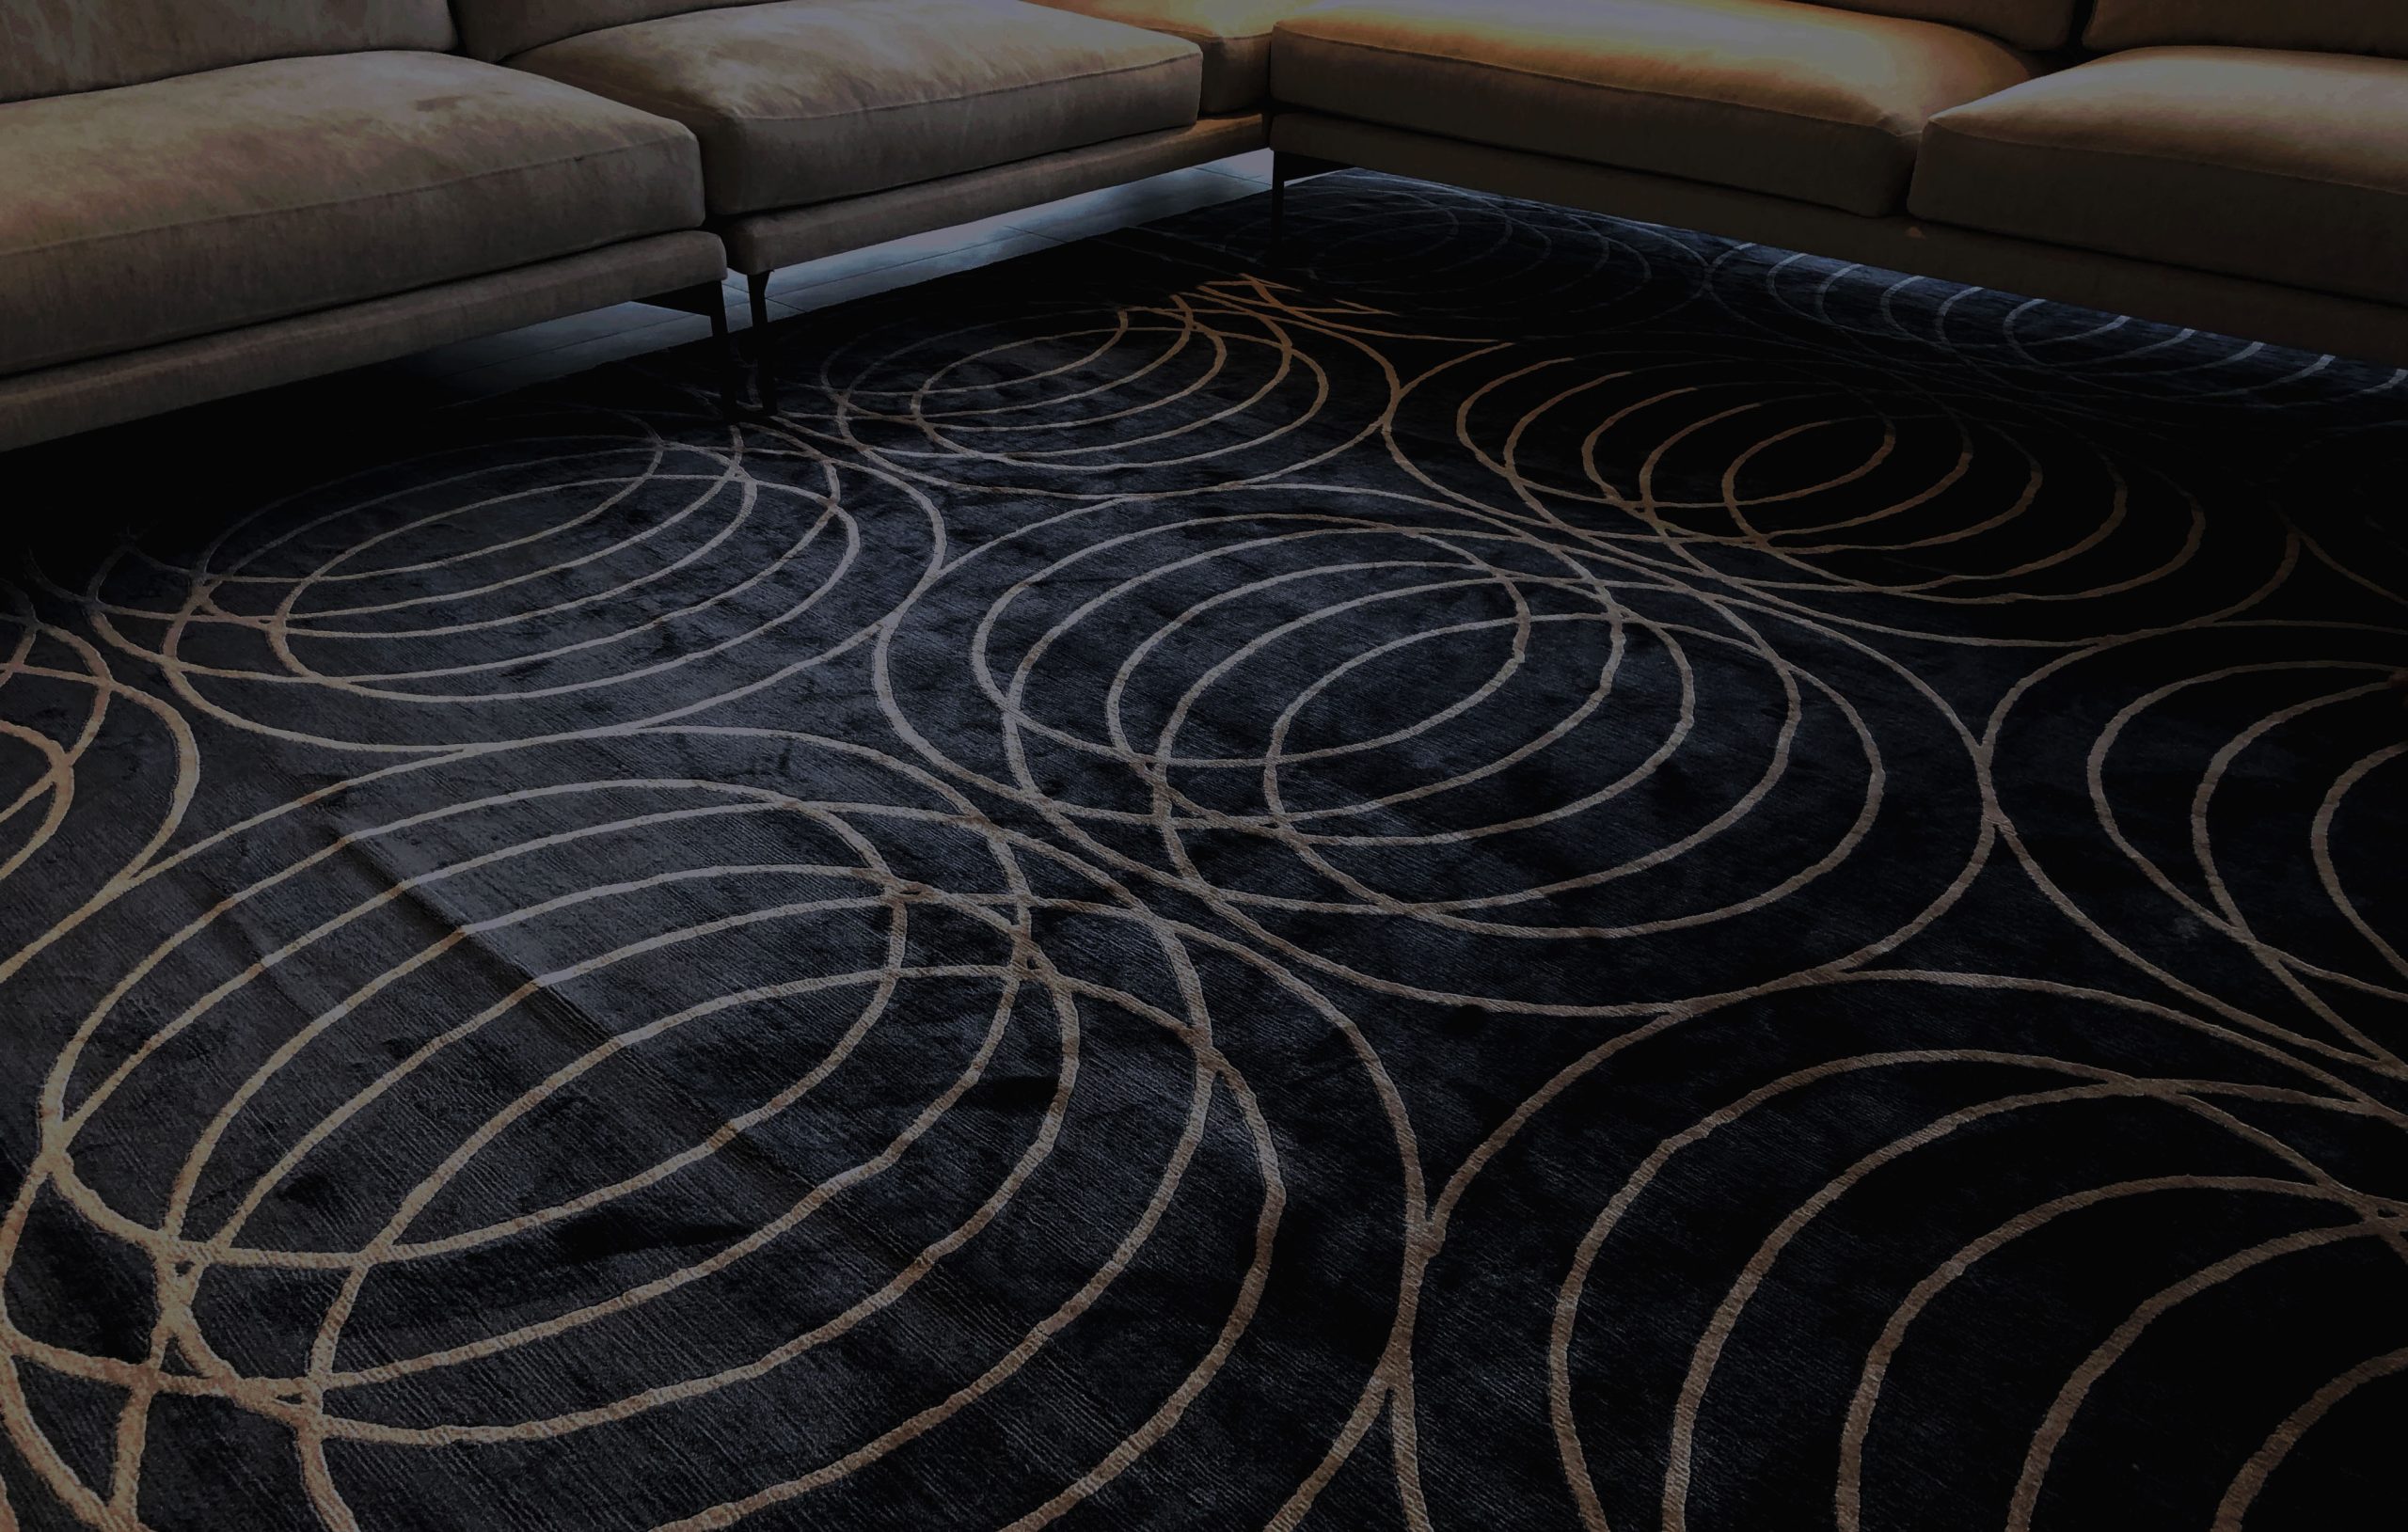 How to choose carpets in Singapore?